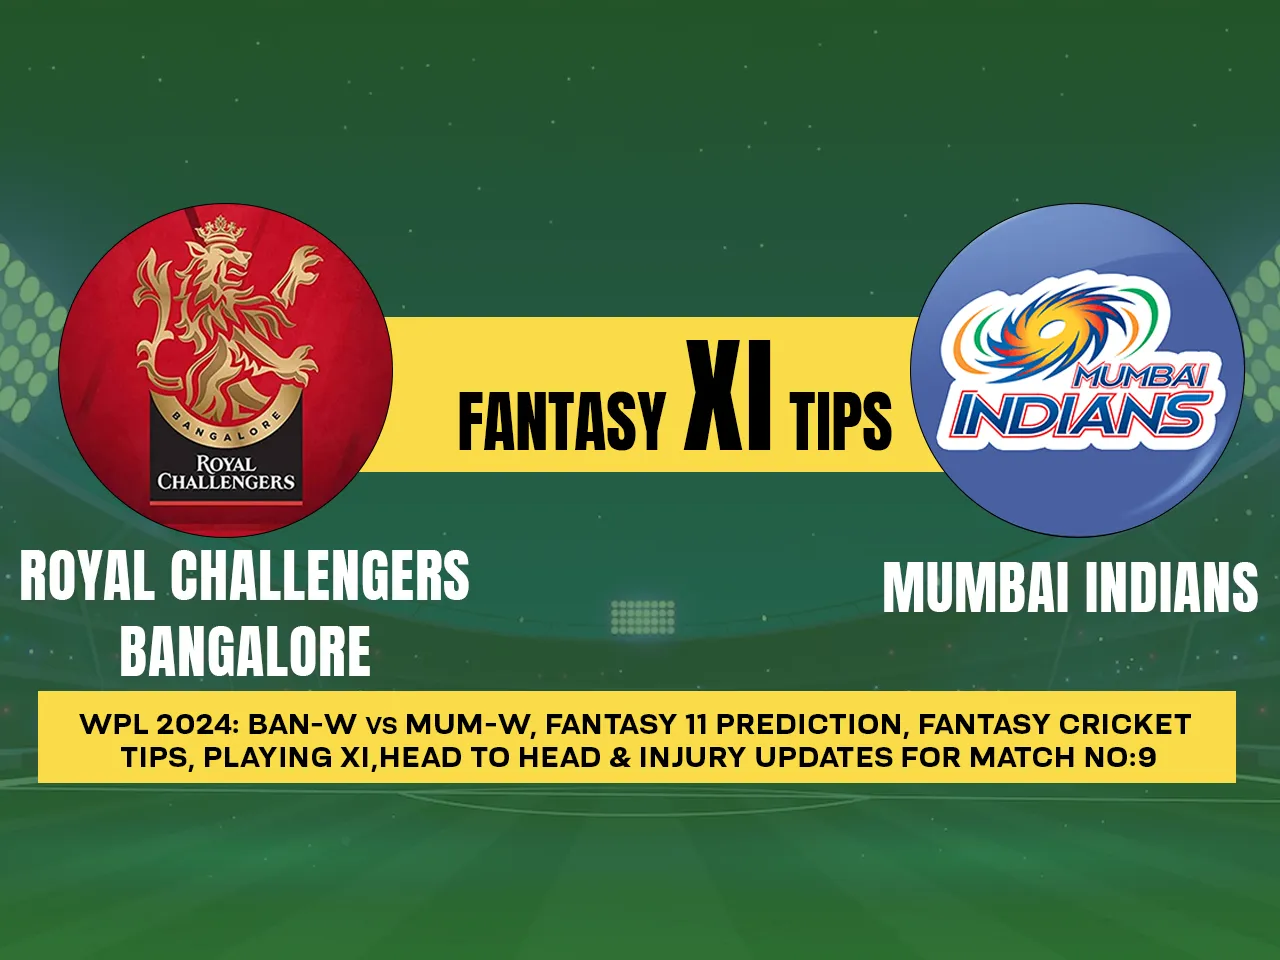 WPL 2024: BAN-W vs MUM-W Dream11 Prediction, Playing XI, Head-to-Head Stats, and Pitch Report for 9th Match